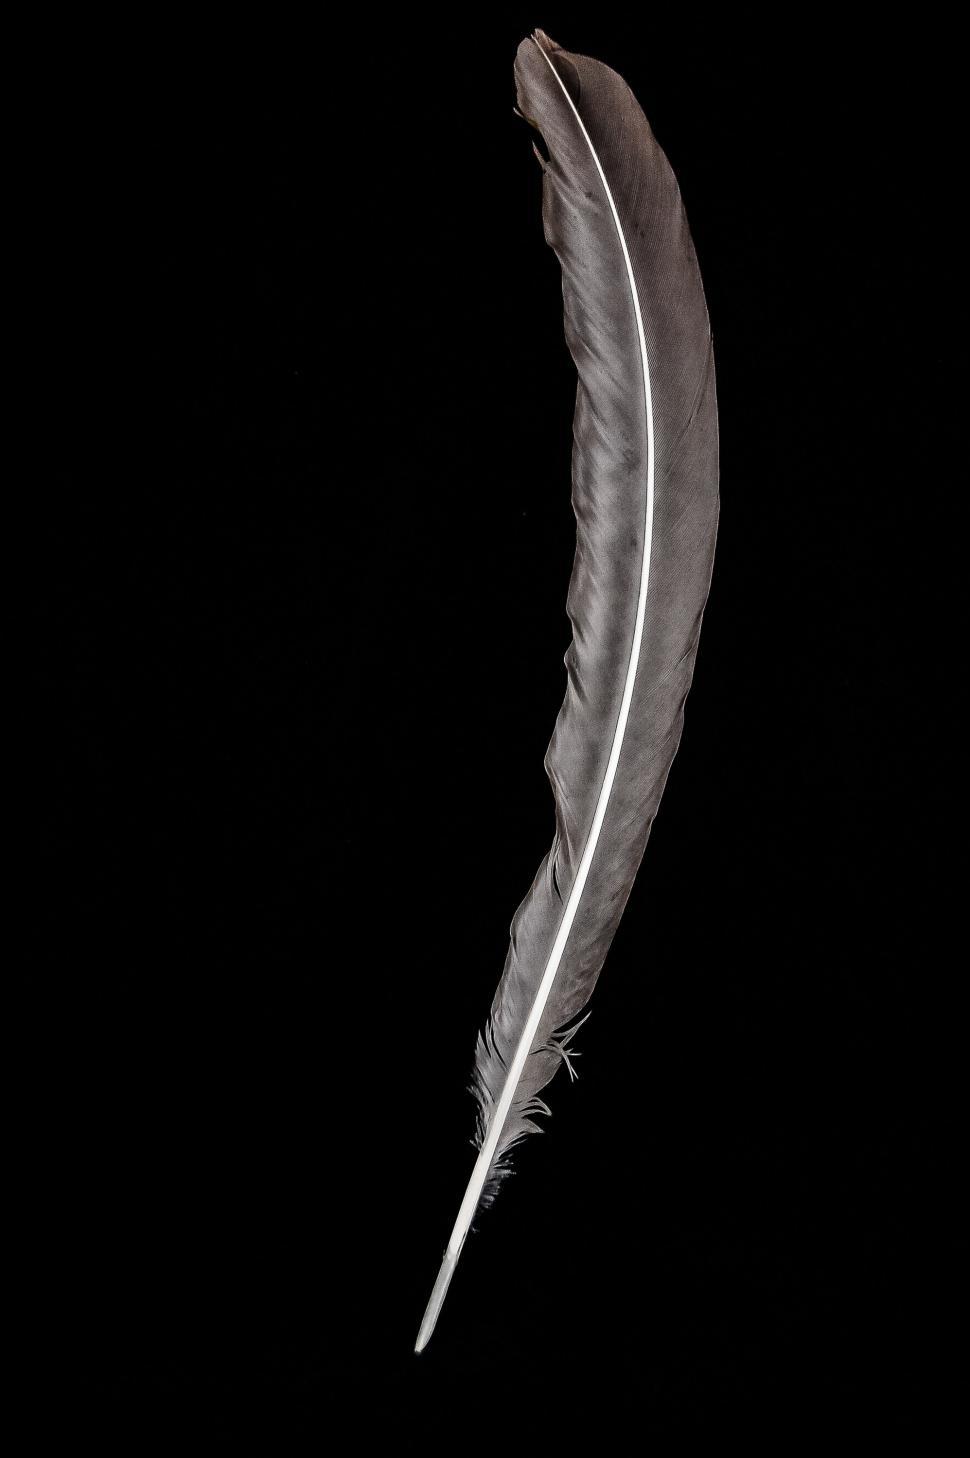 Free Image of Monochrome Feather 